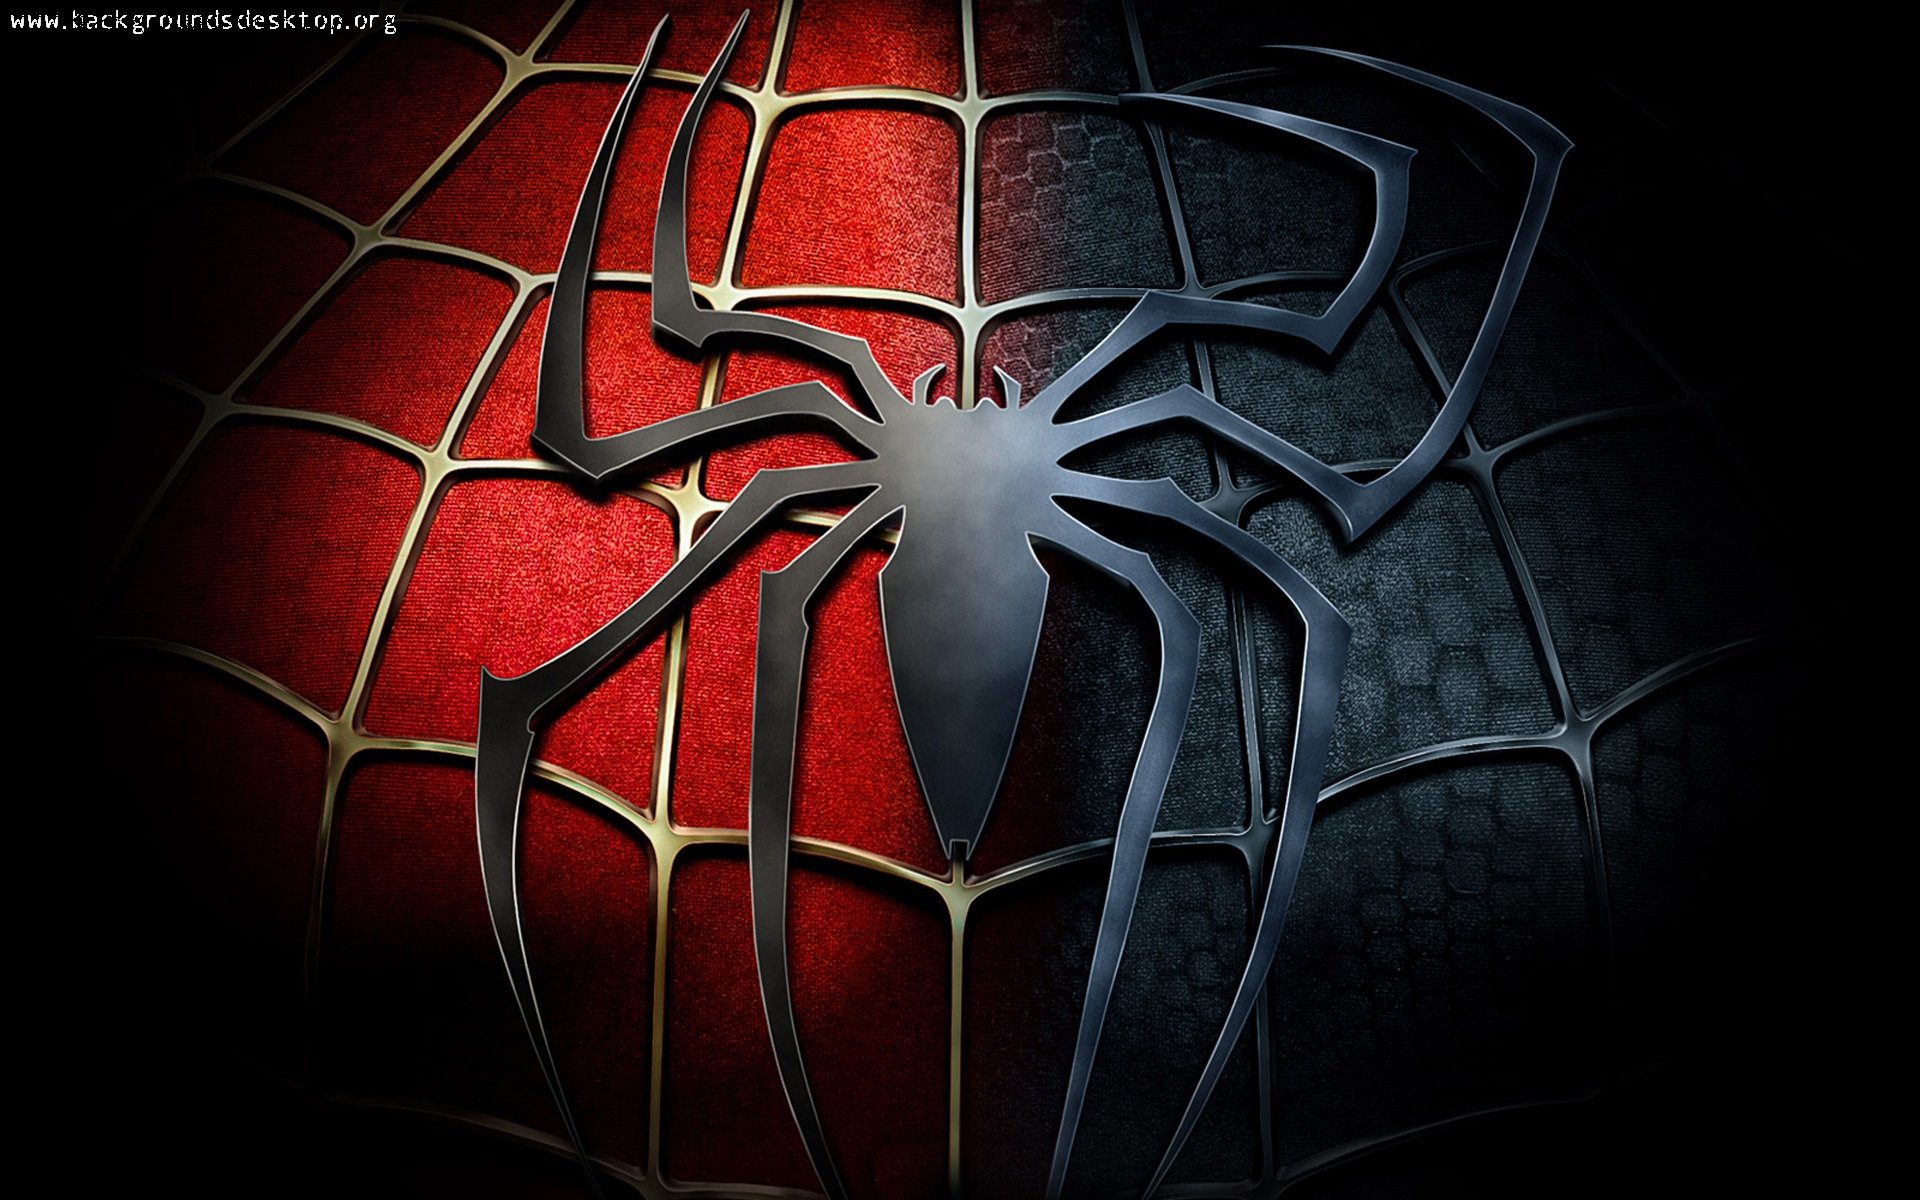 Spiderman Logo Wallpapers for PC 242 - HD Wallpapers Site